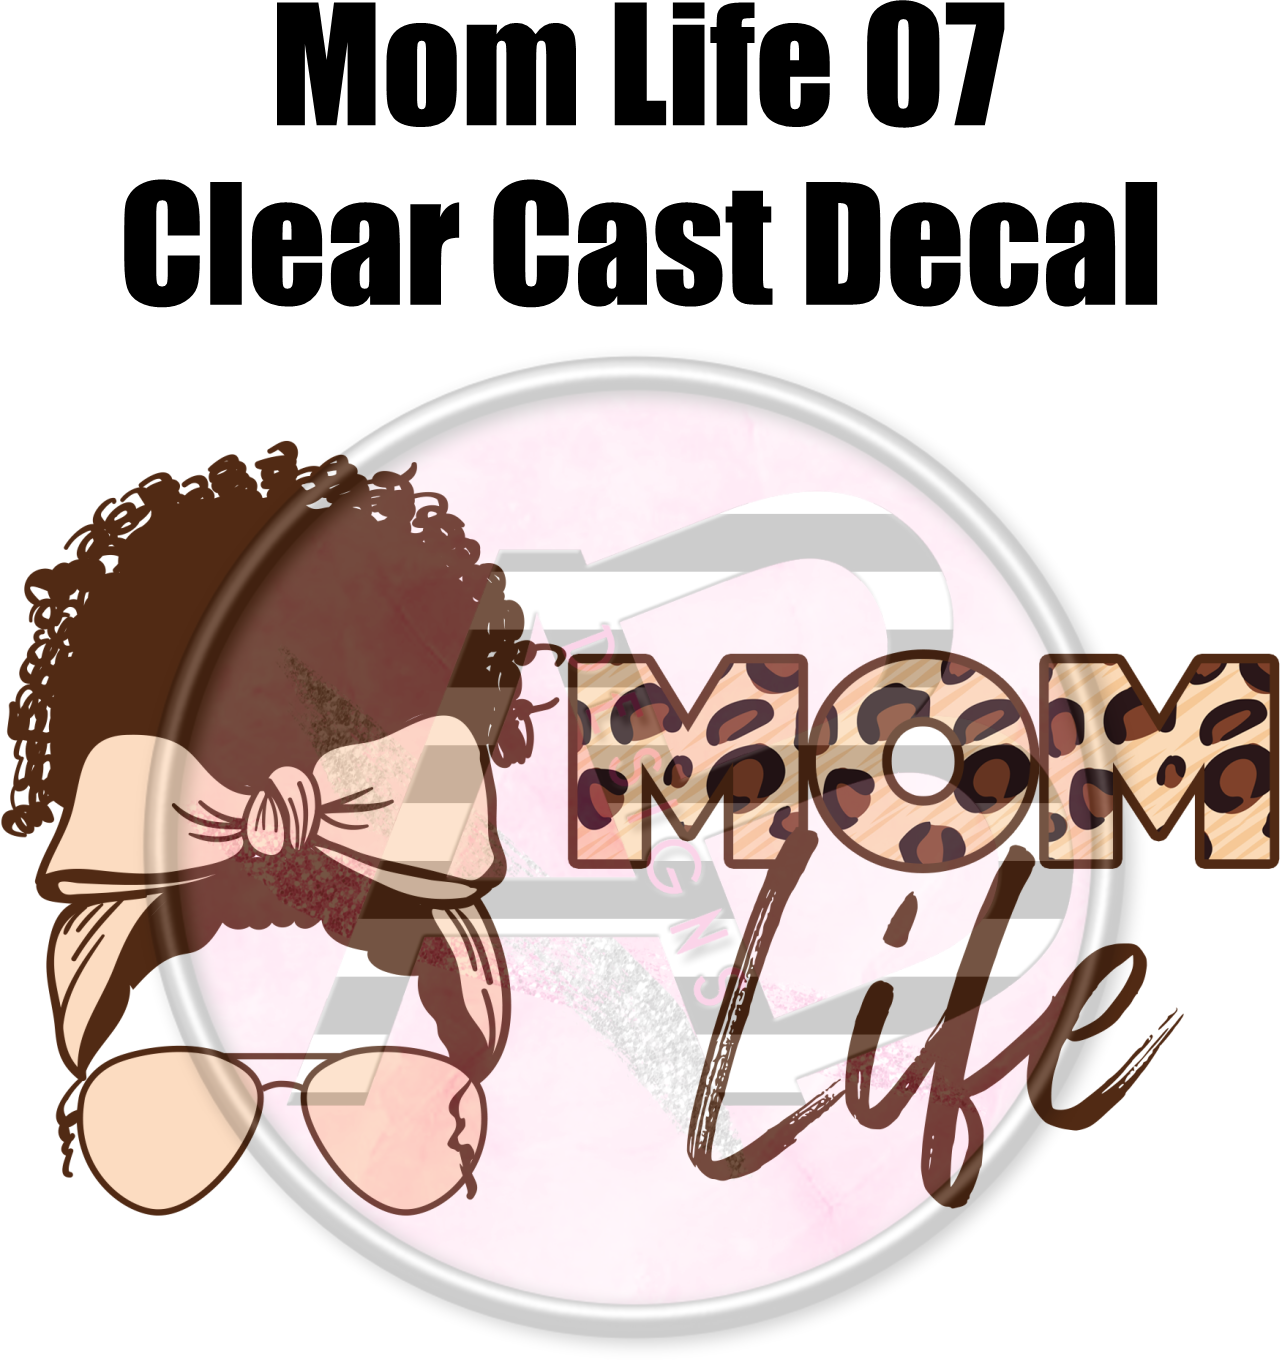 Mom Life 07 - Clear Cast Decal